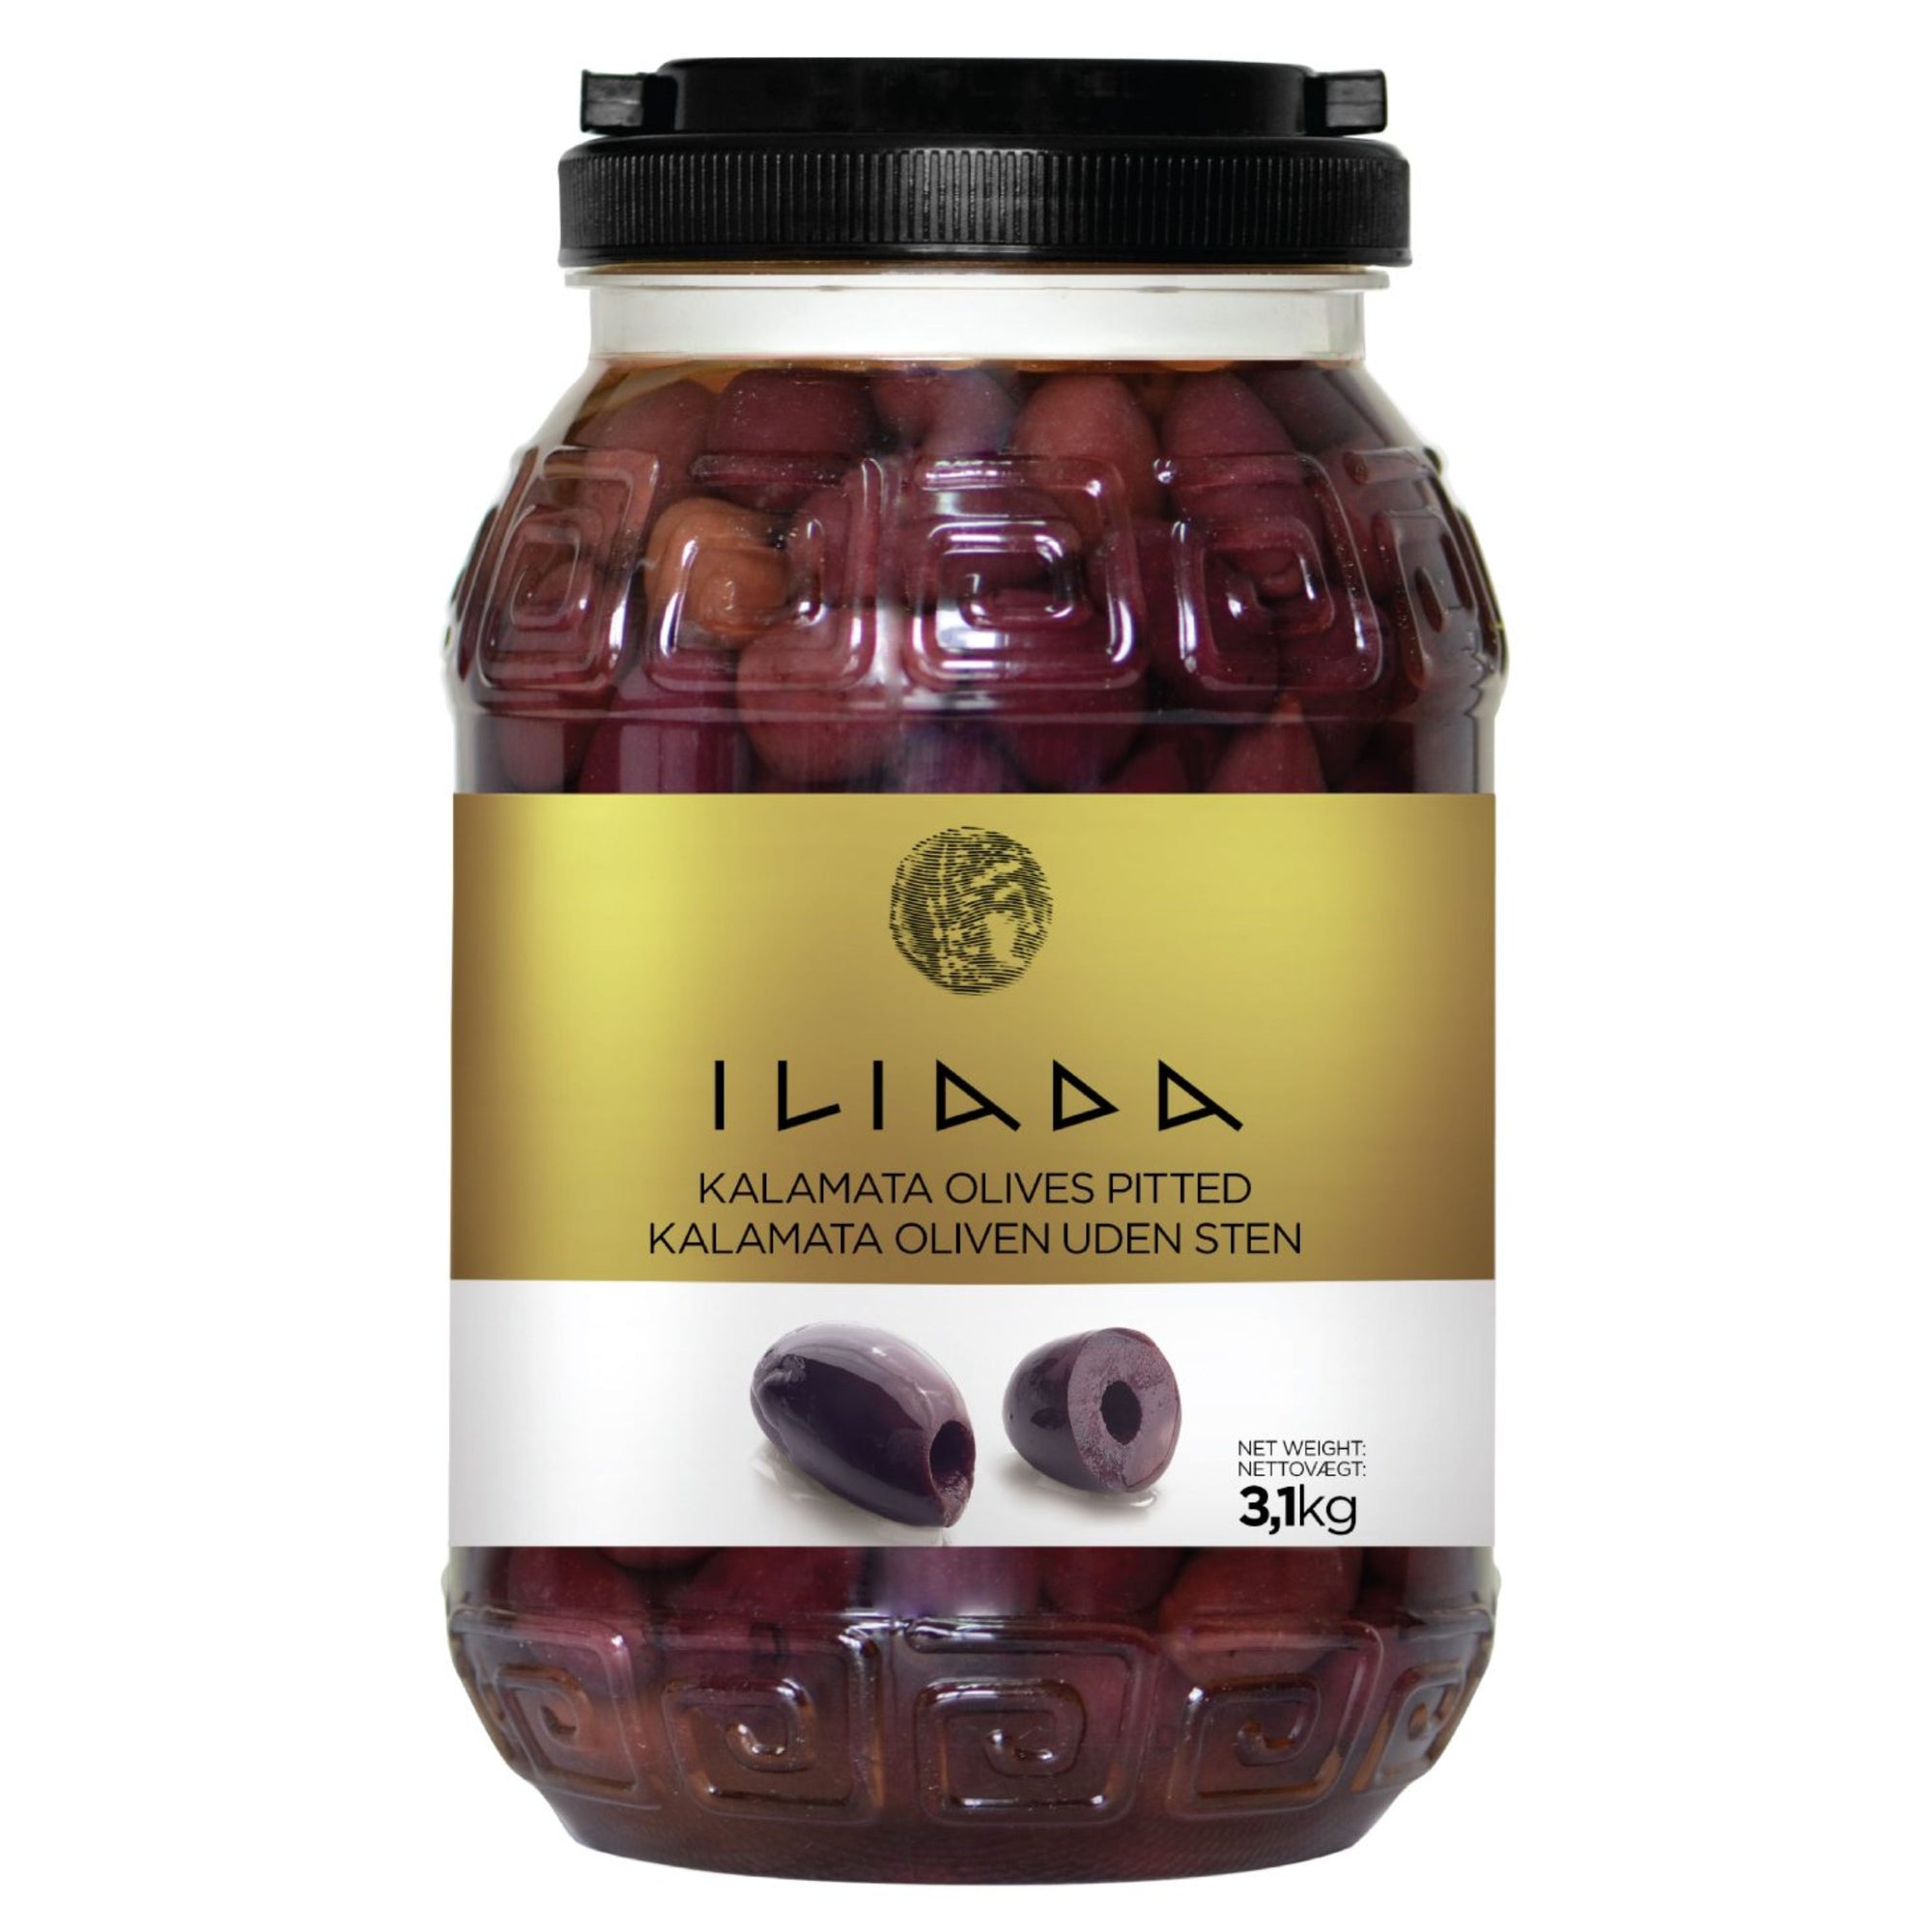 Kalamata Pitted Olives 'Iliada' CLEAR PET drum 3kg (1.6kg drained)